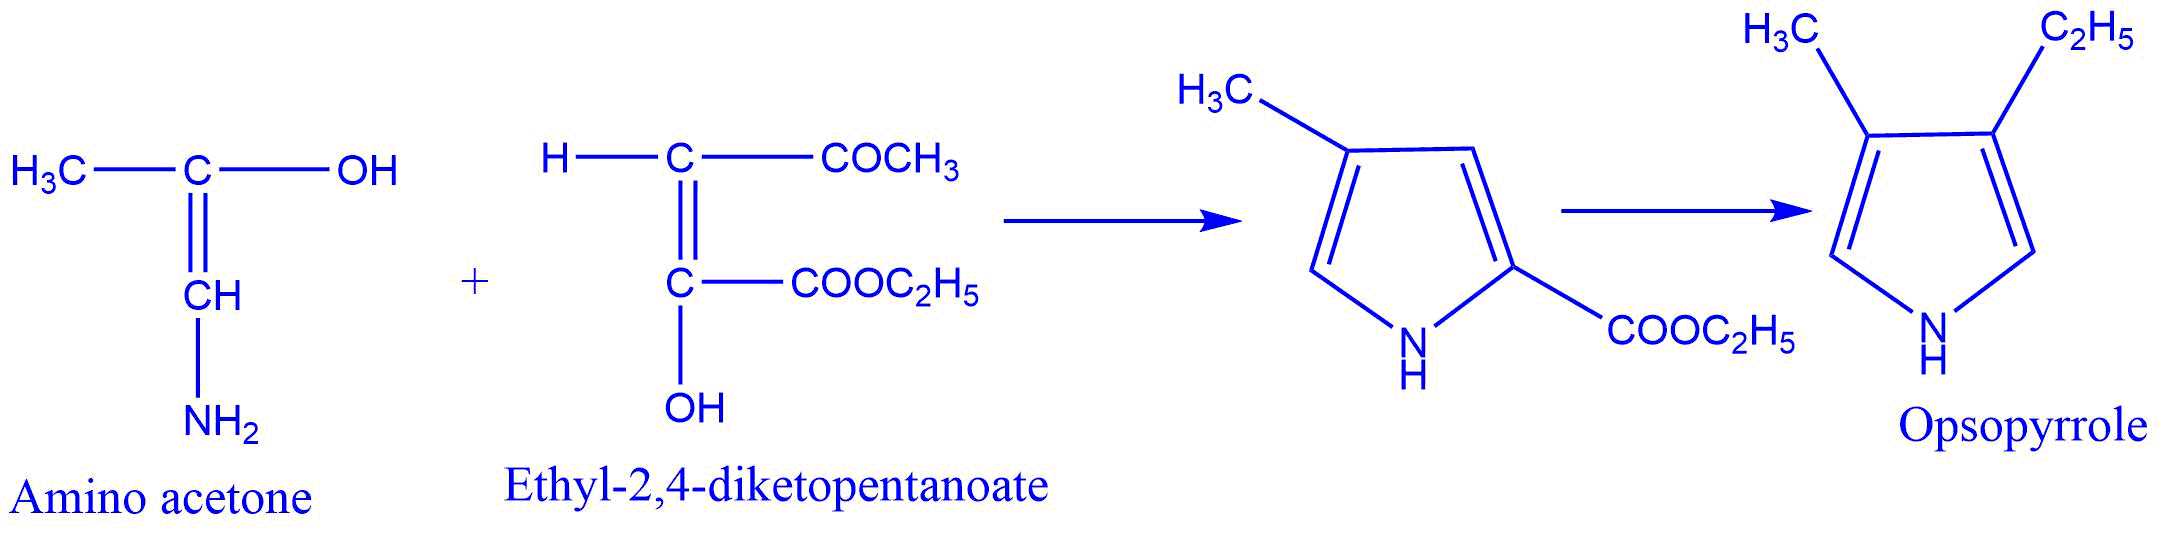 Synthesis of pyrrole